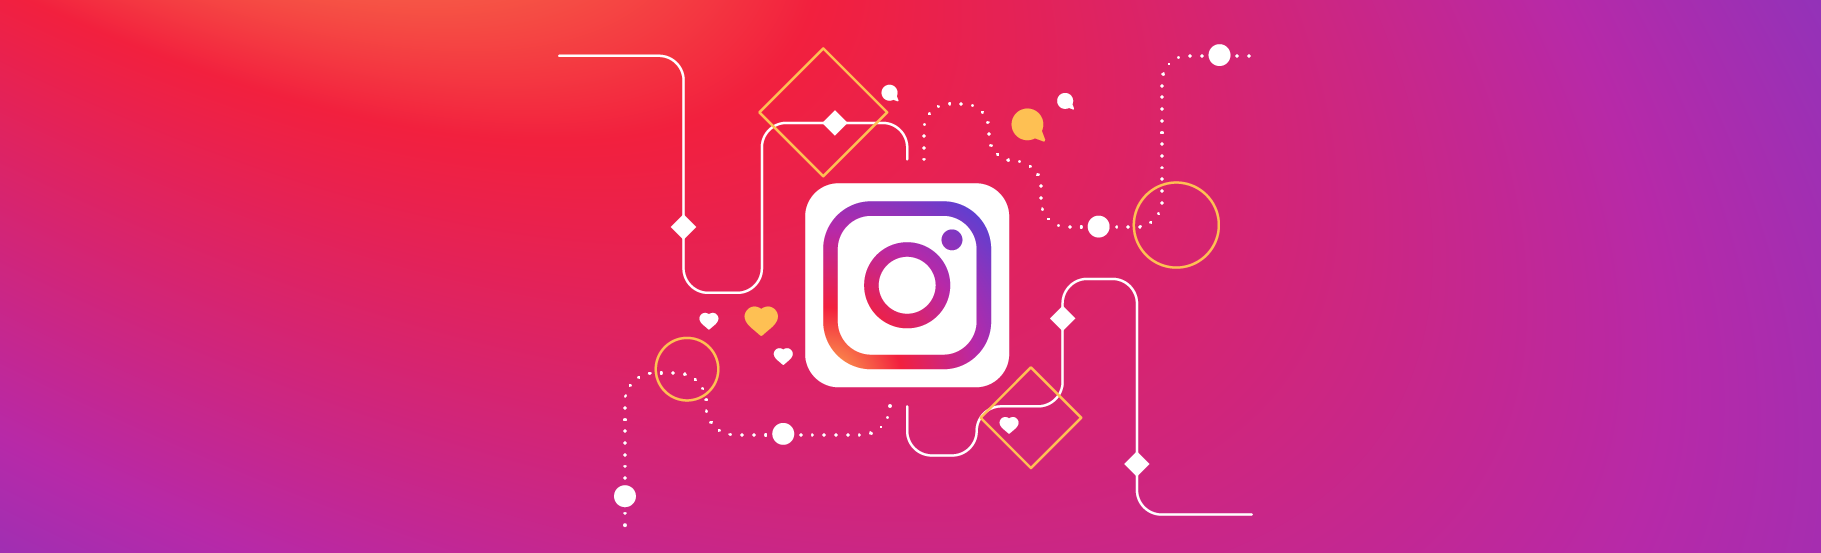 Instagram algorithm: Most important facts you should be familiar with